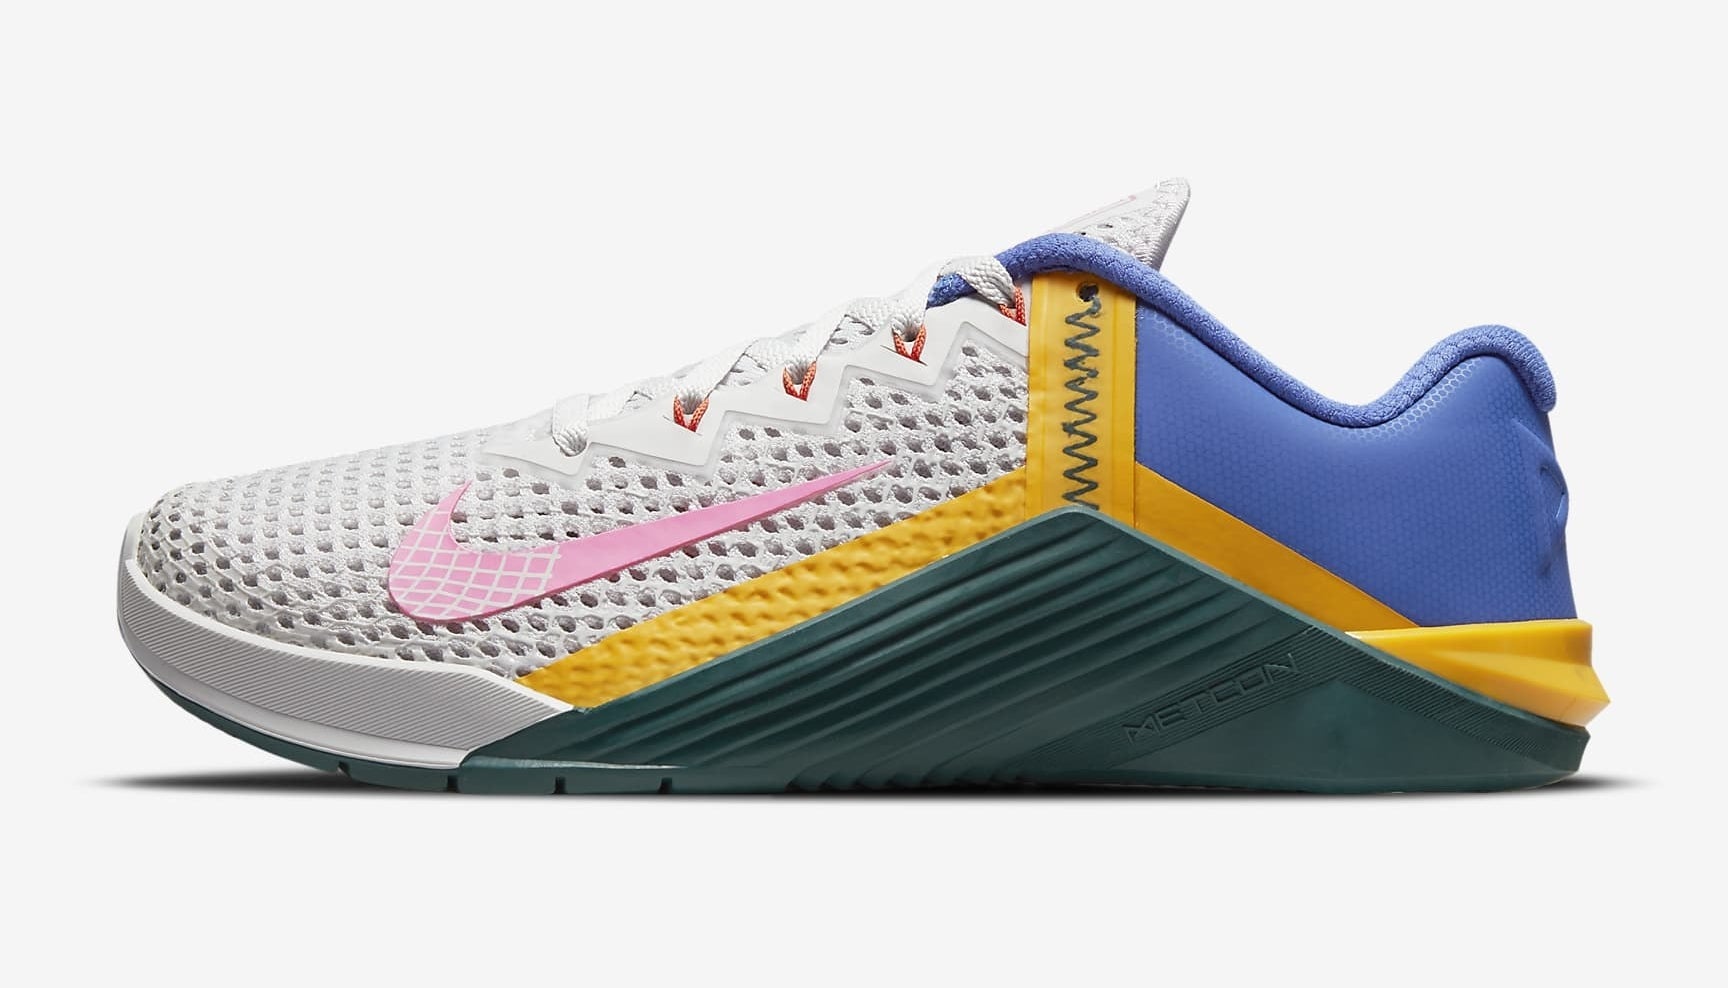 Nike Metacon 6 training shoe with white, blue, pink, yellow, and green detailing